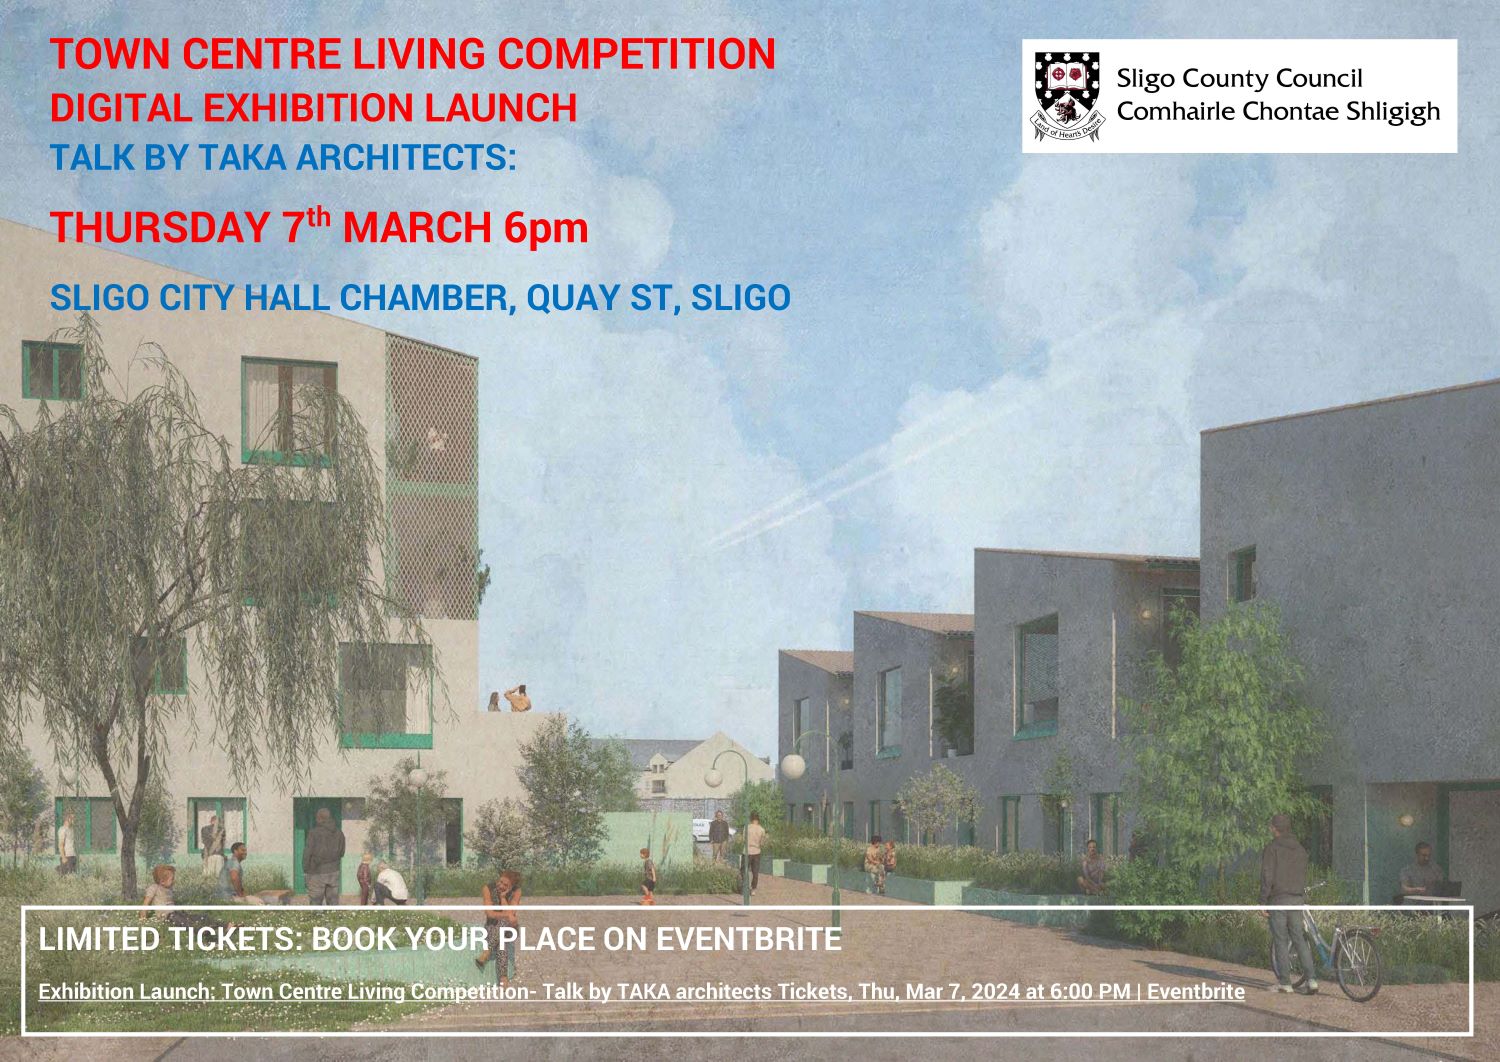 Town Centre Living Competition - Digital Exhibition